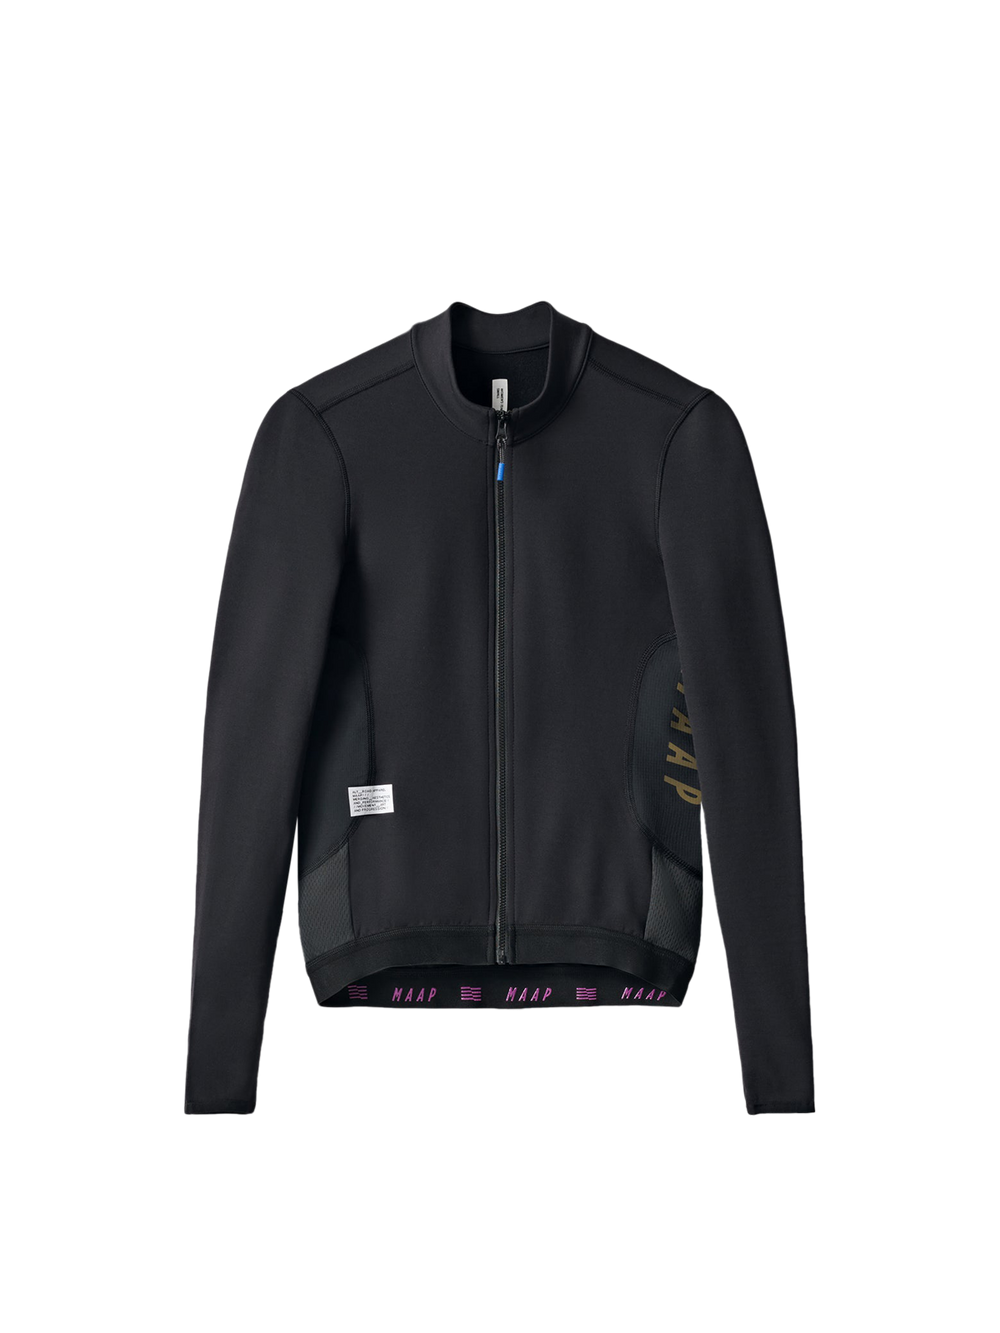 Product Image for Women's Alt_Road LS Jersey